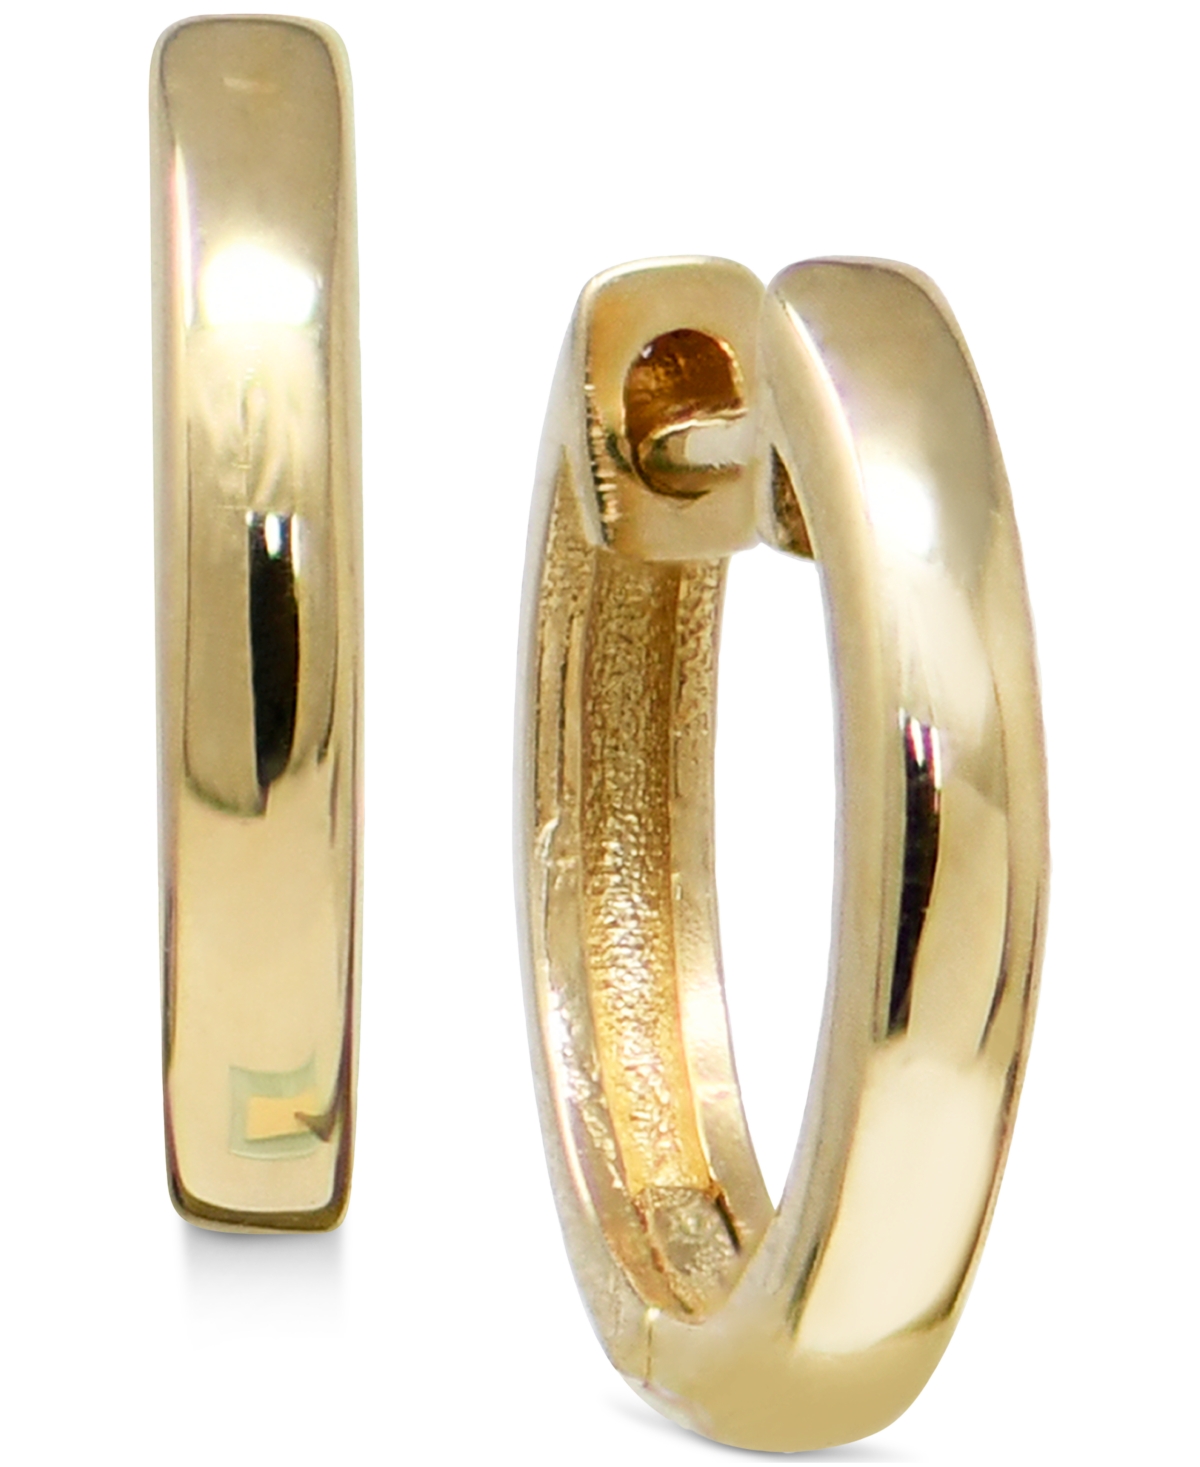 Polished Gold Huggie Small Hoop Earrings in 14k Gold, 0.5" - Gold